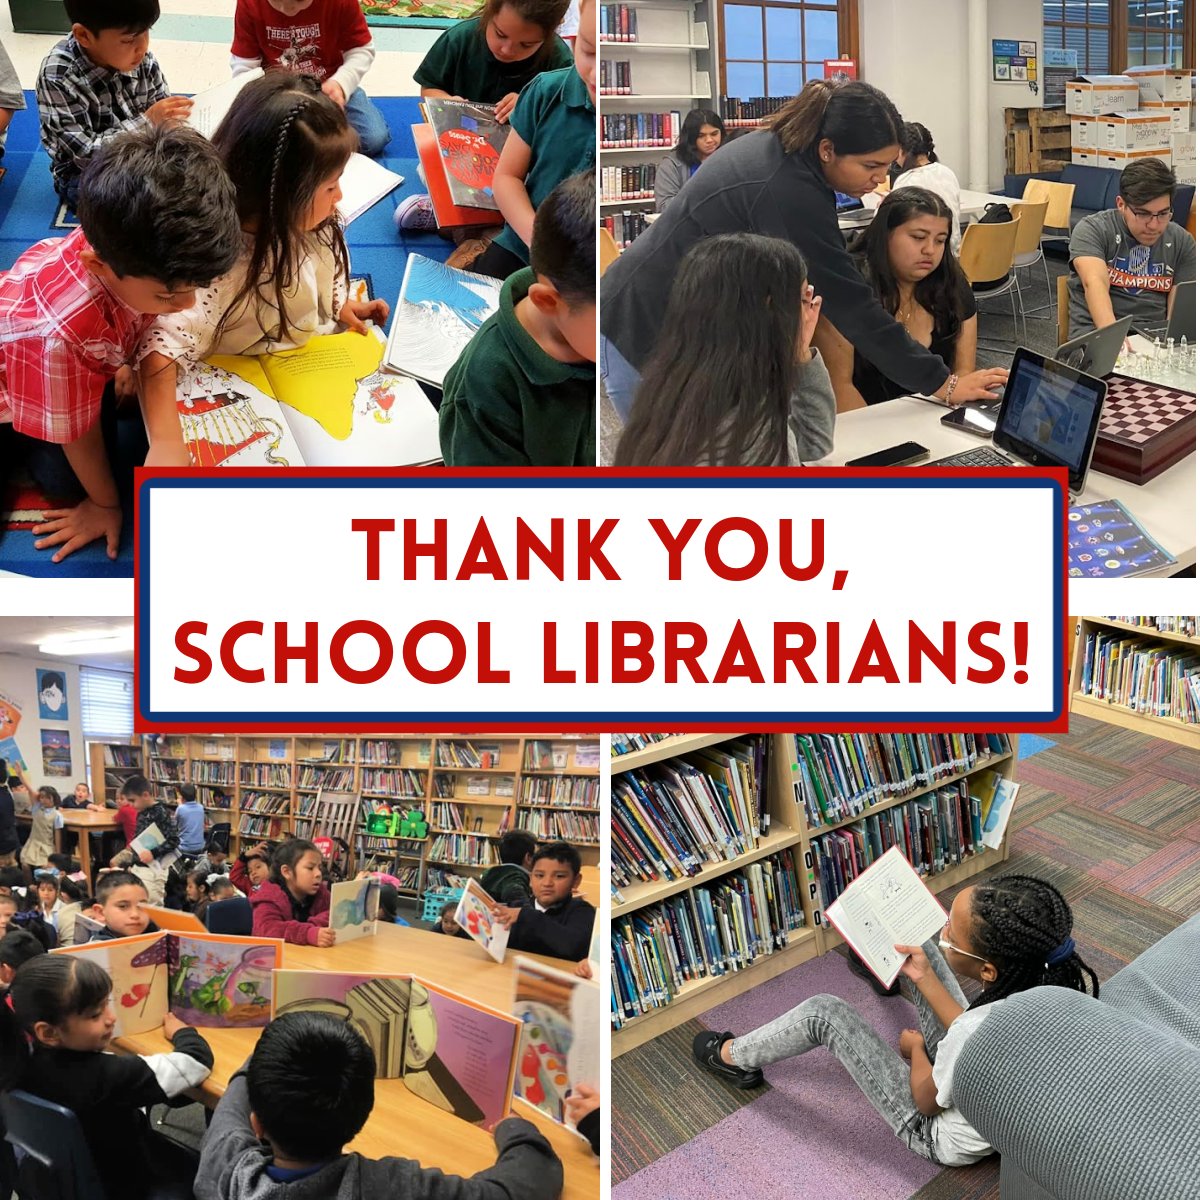 You help children fall in love with reading & learning; assist students with digital resources, research, & writing; teach critical thinking; provide a safe refuge & work space; share tech skills; & so much more. #SchoolLibrarianDay #NationalSchoolLibrarianDay #saveHISDlibraries